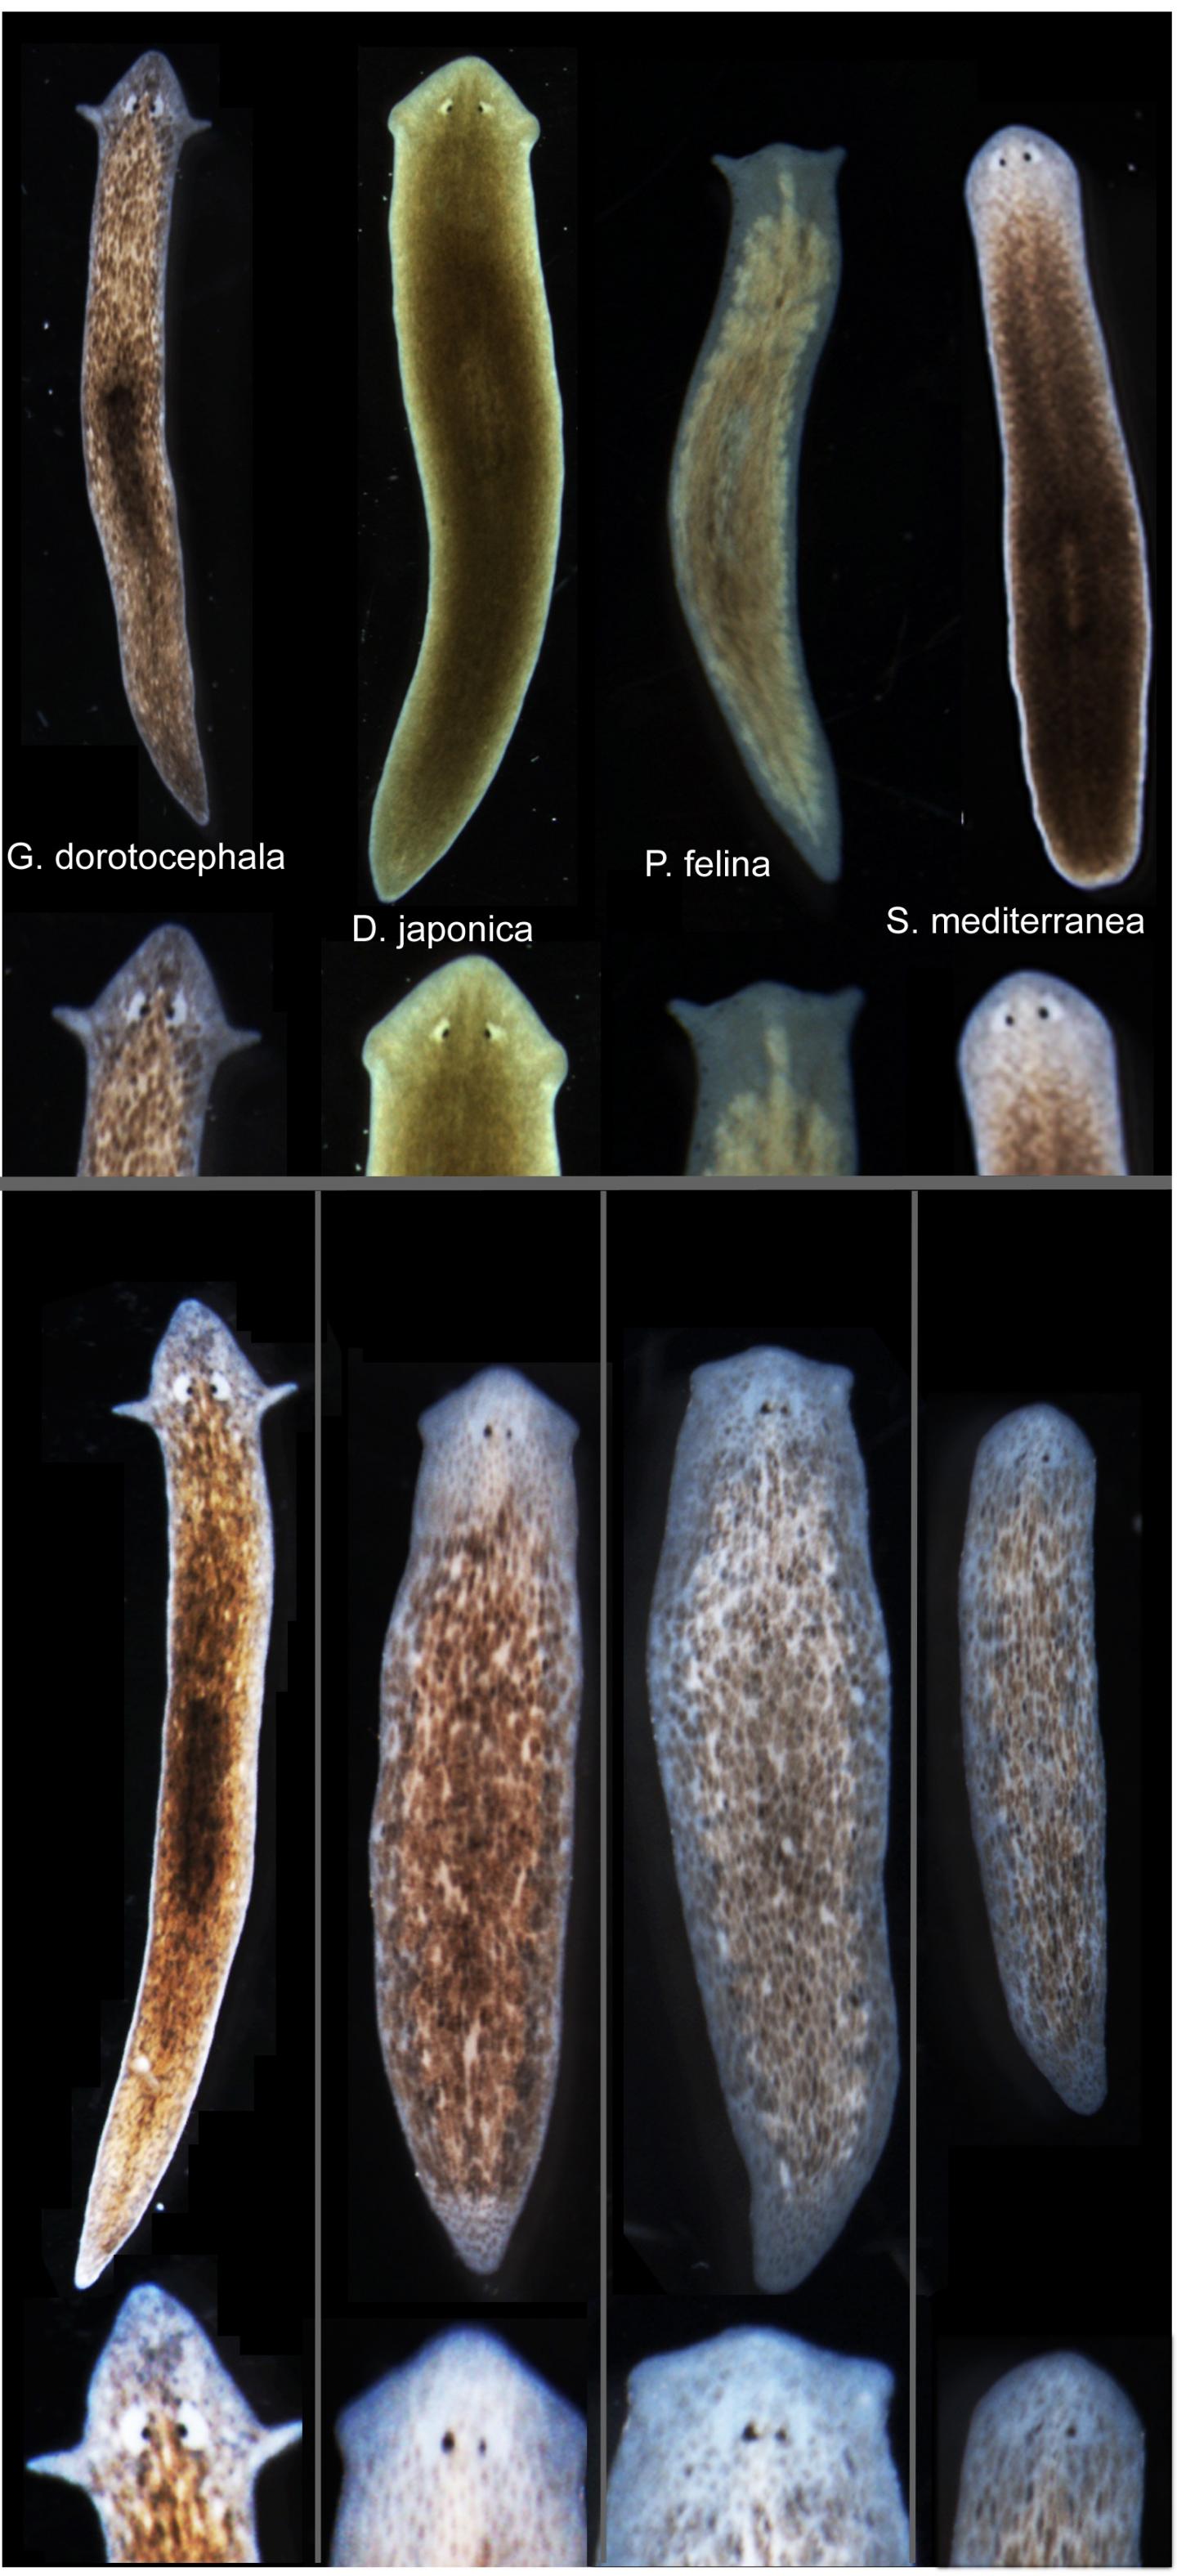 Biologists induced one species of flatworm—<I>G. dorotocephal</I>, top left—to grow heads and brains characteristic of other species of flatworm, top row, without altering genomic sequence. Examples of the outcomes can be seen in the bottom row of the image. [Center for Regenerative and Developmental Biology, School of Arts and Sciences, Tufts University.]” /><br />
<span class=